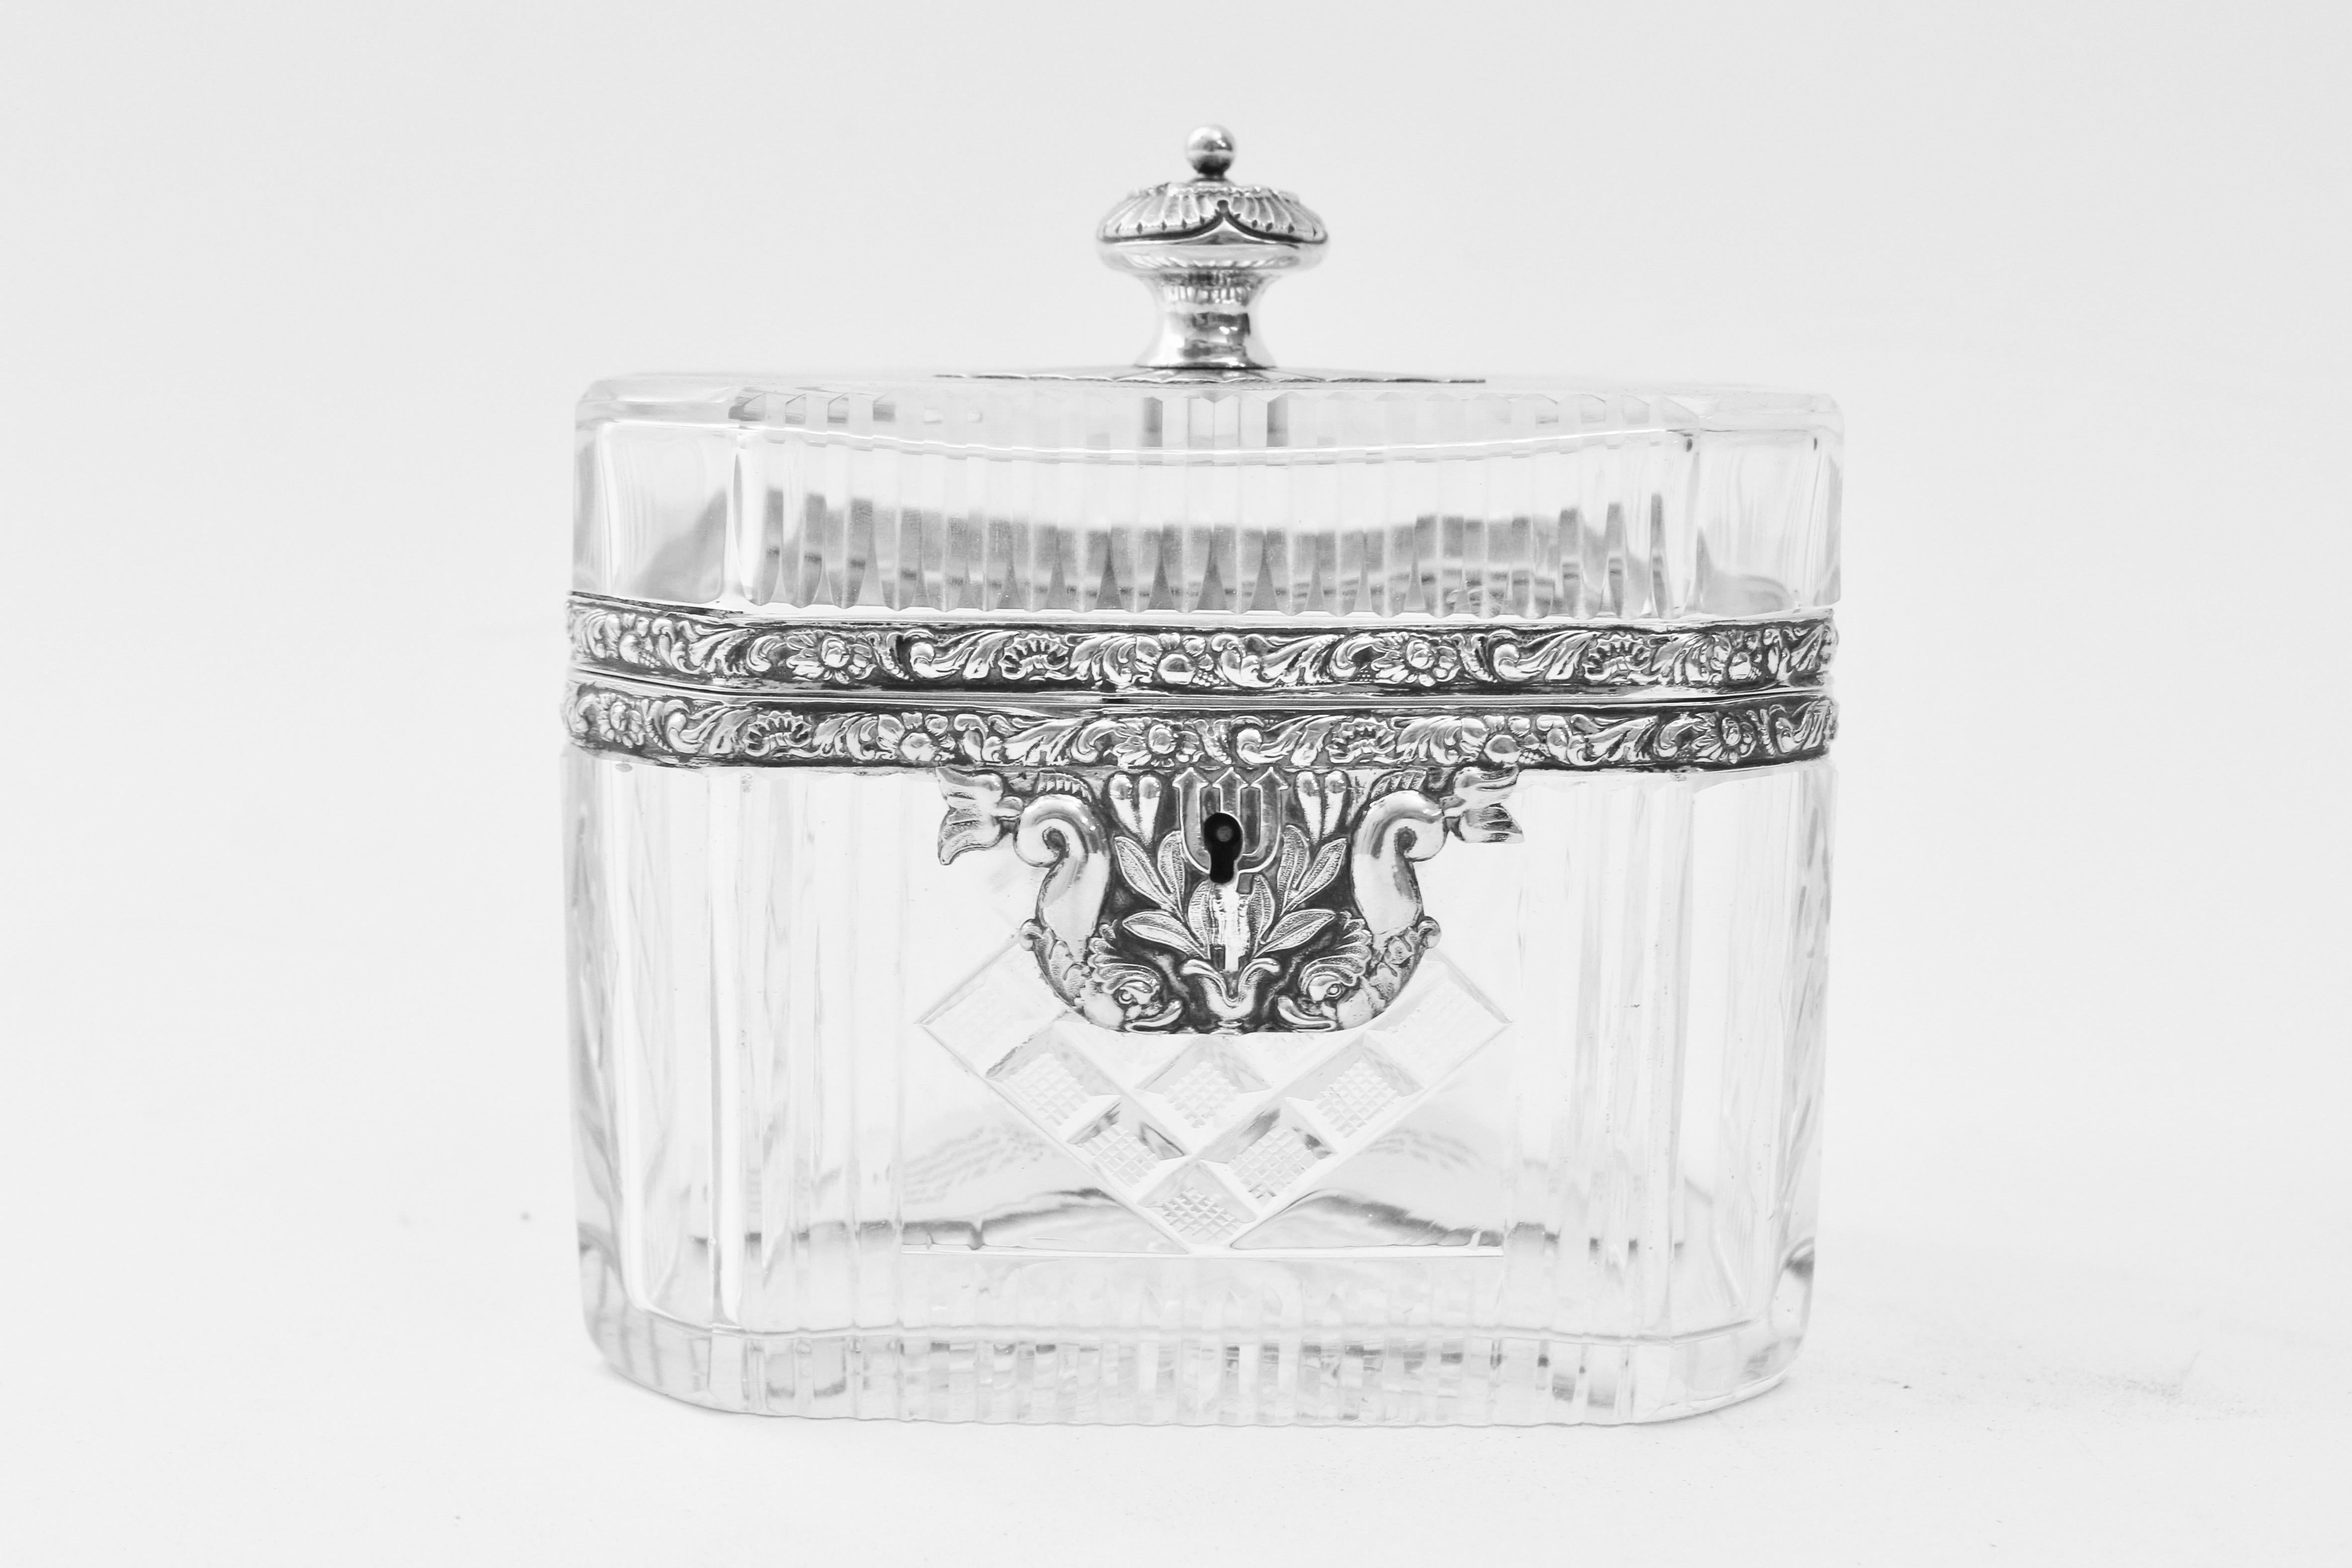 Rectangular continental cut glass box with silver mounts circa 1900. The cut glass body with diamond formation hobnail cut sections on all sides, framed by slice cut detailing on the front and sides, and around the rim of the lid. The silver mounts